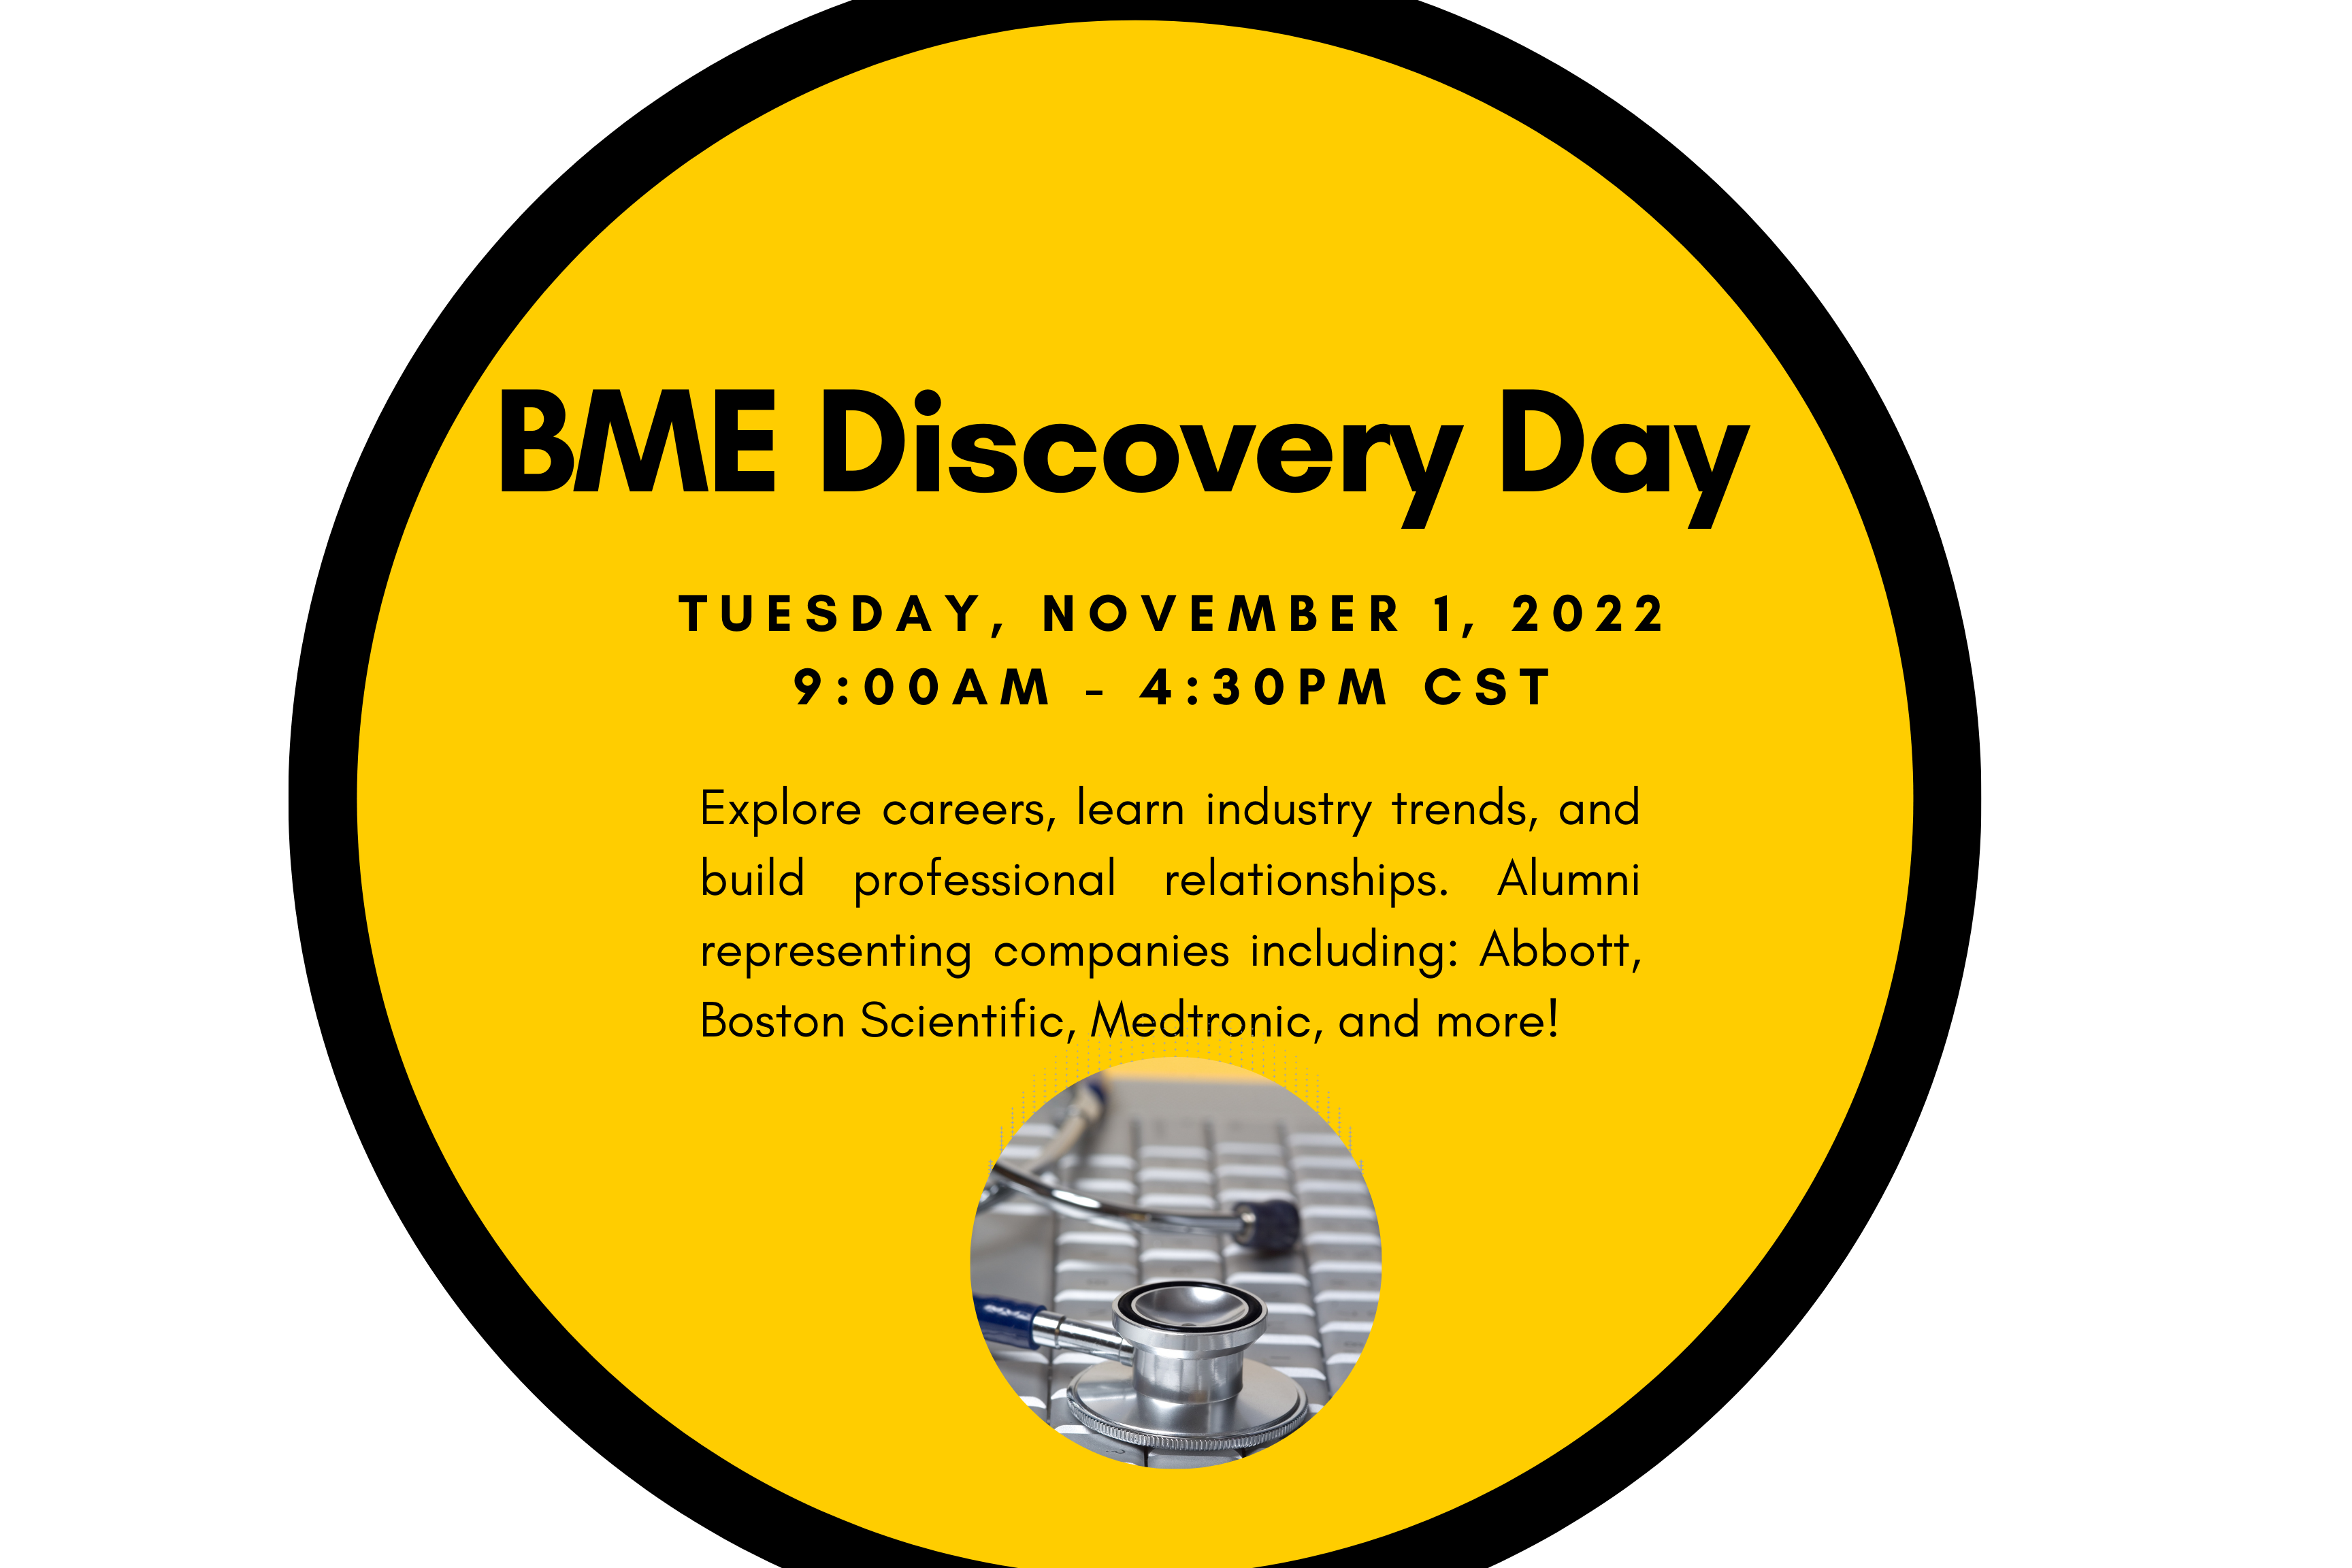 BME Discovery Day, Tuesday, November 1, 2022 9am-4:30 pmCST. Explore careers, learn industry trends, and build professional relationships